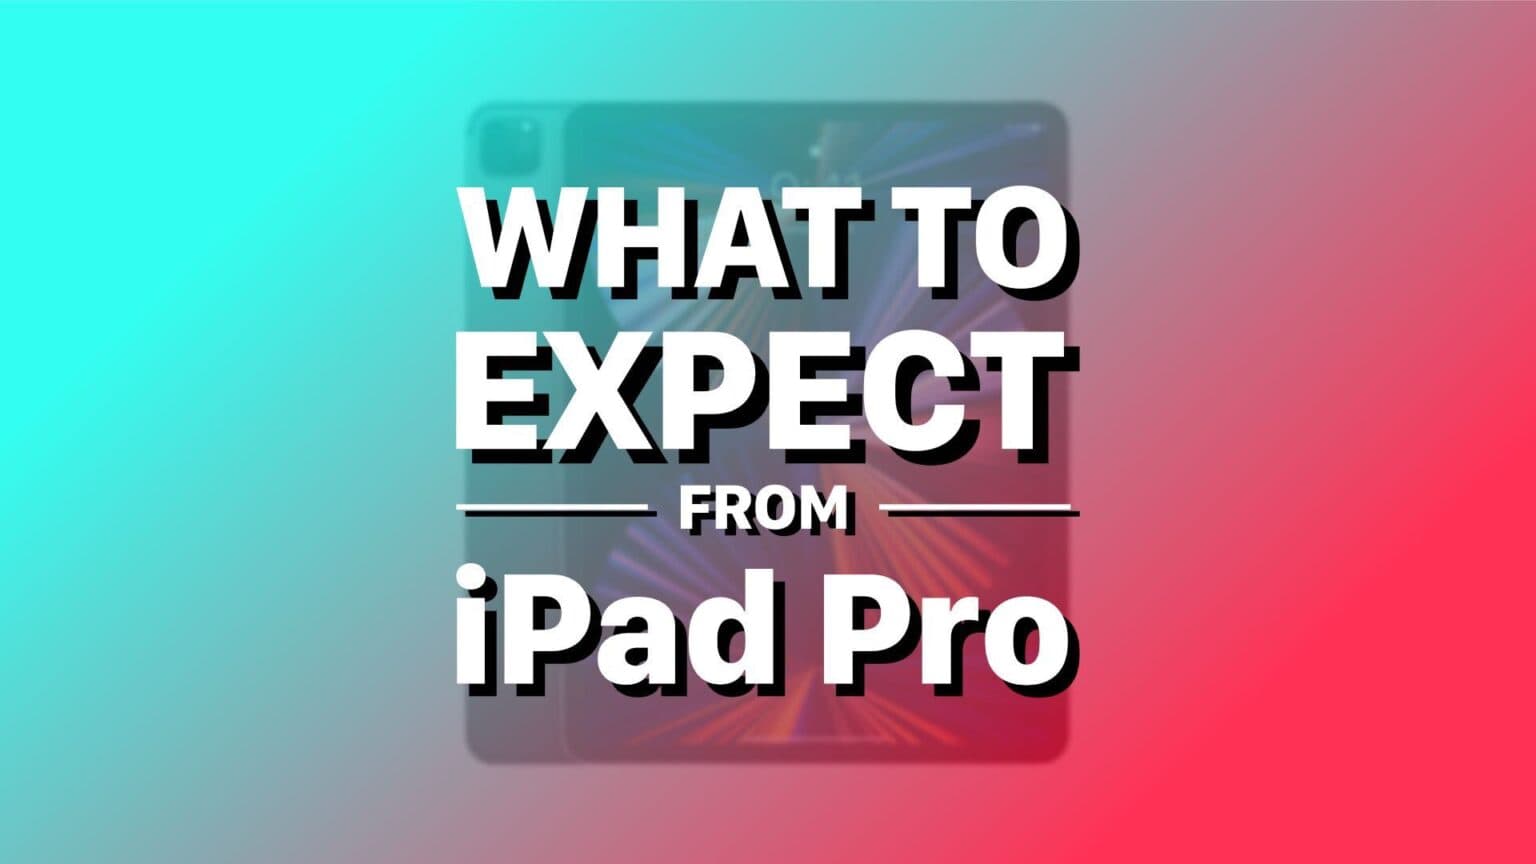 What to expect from iPad Pro, iPad Air and basic iPad in 2022